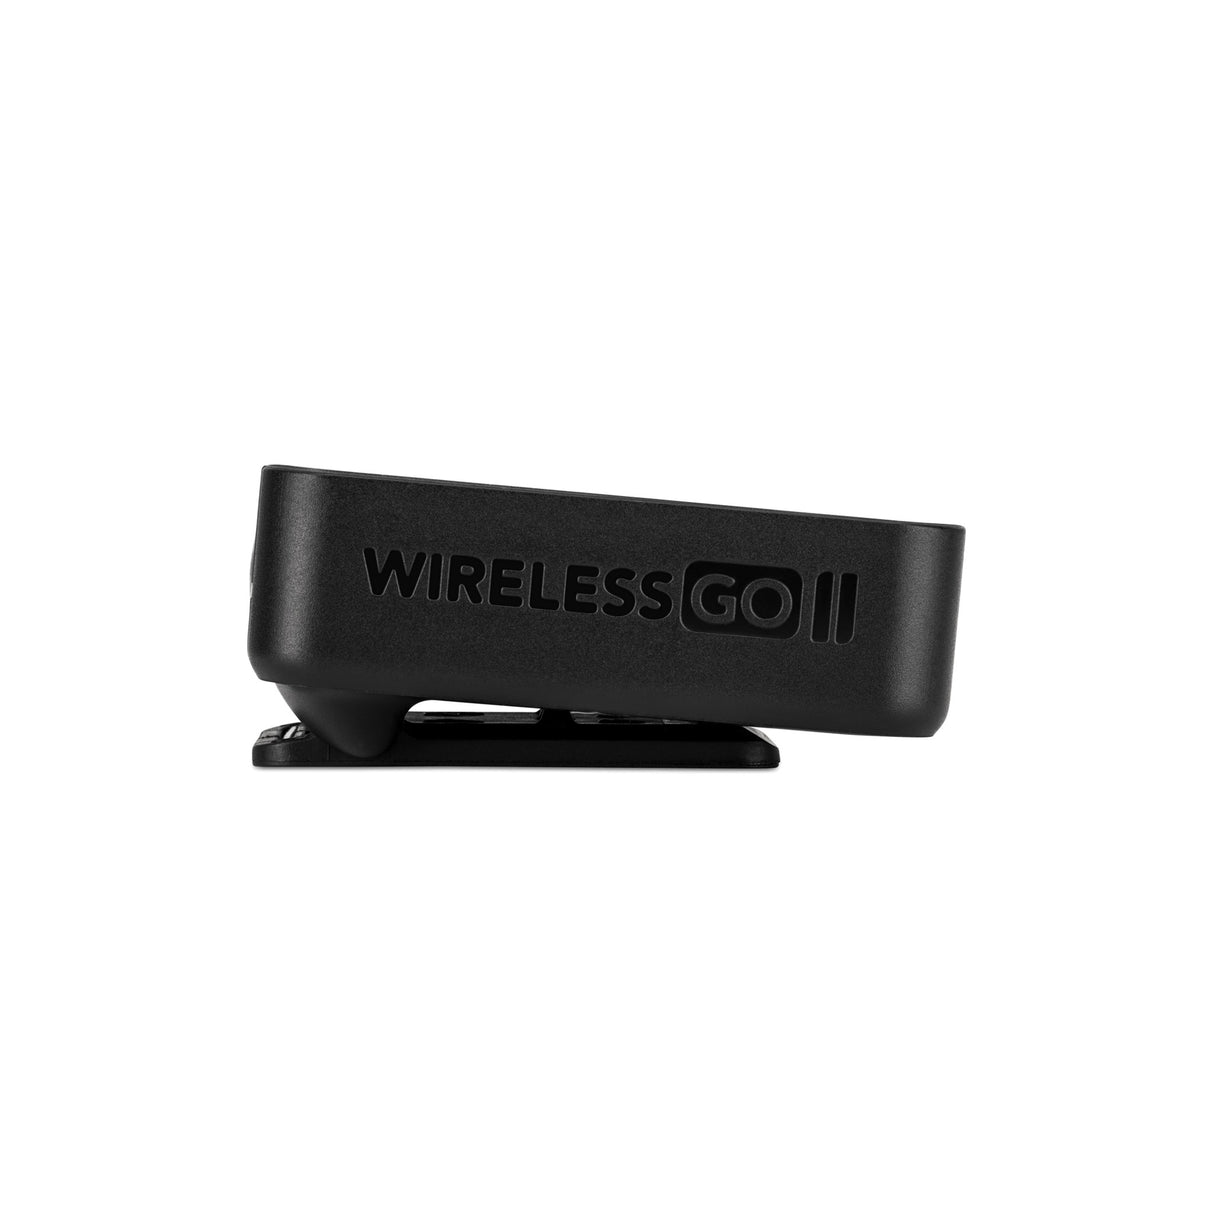 RODE Wireless GO II TX Ultra-Compact Wireless Microphone Transmitter (Used)